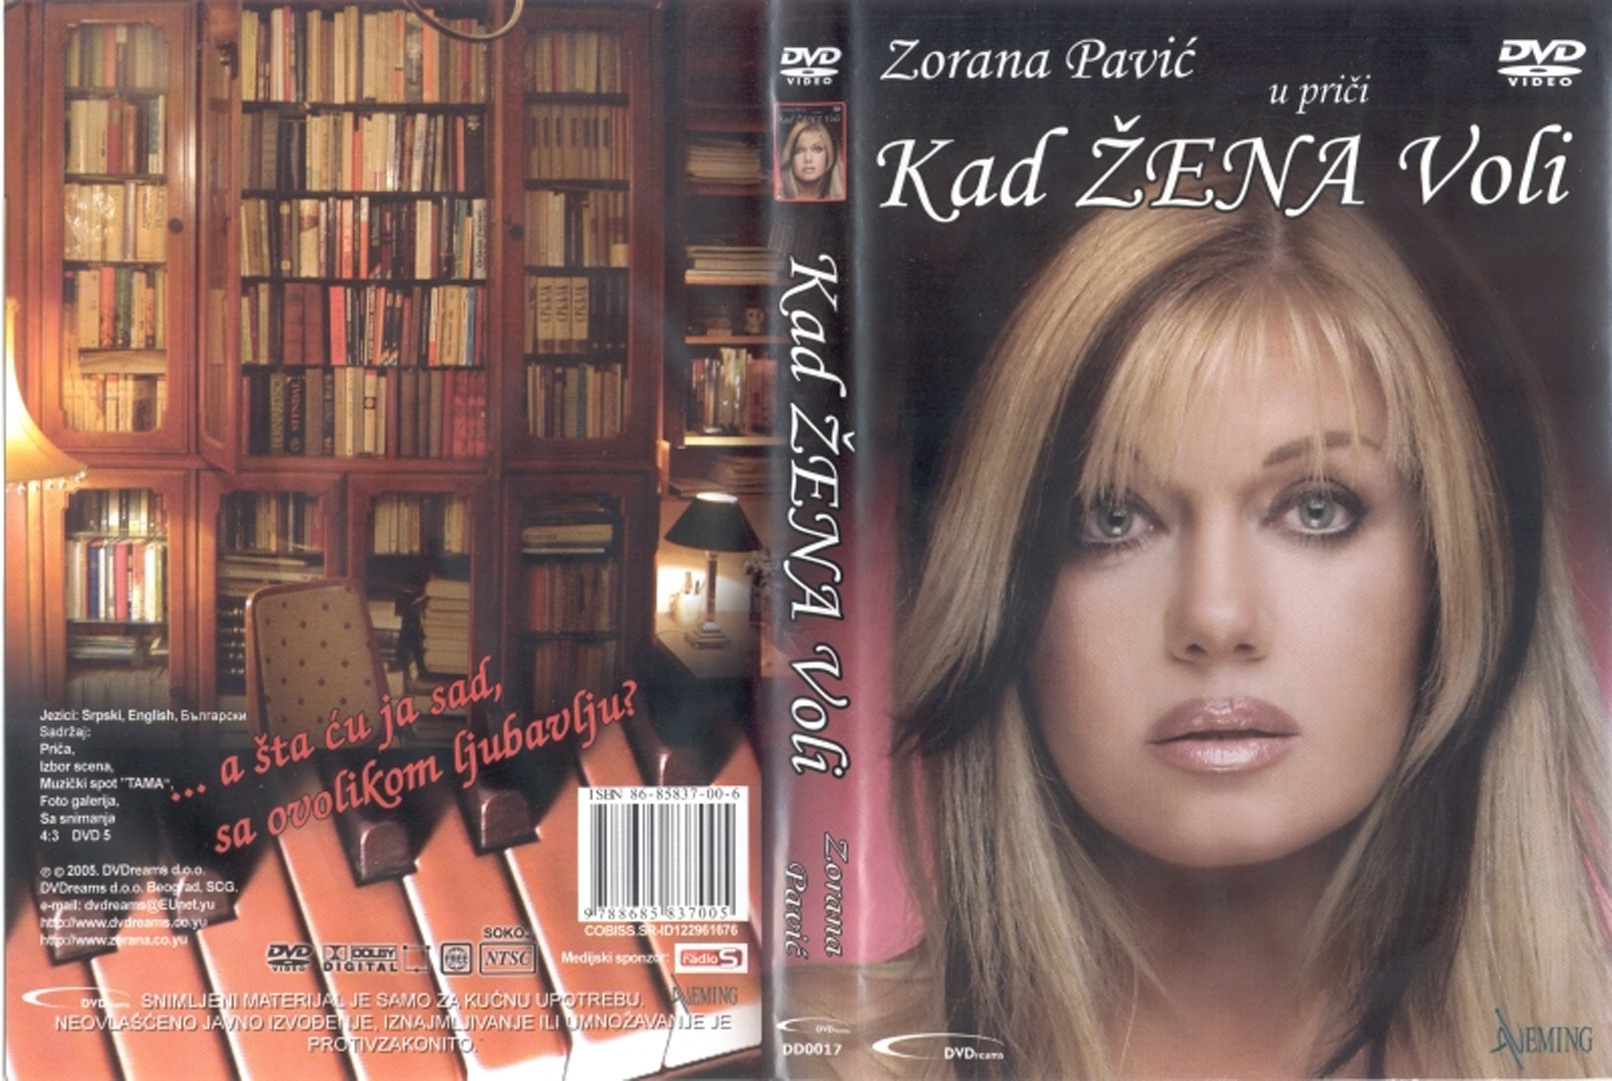 Click to view full size image -  DVD Cover - K - kad_zena_voli_zorana_pavic_dvd - kad_zena_voli_zorana_pavic_dvd.jpg